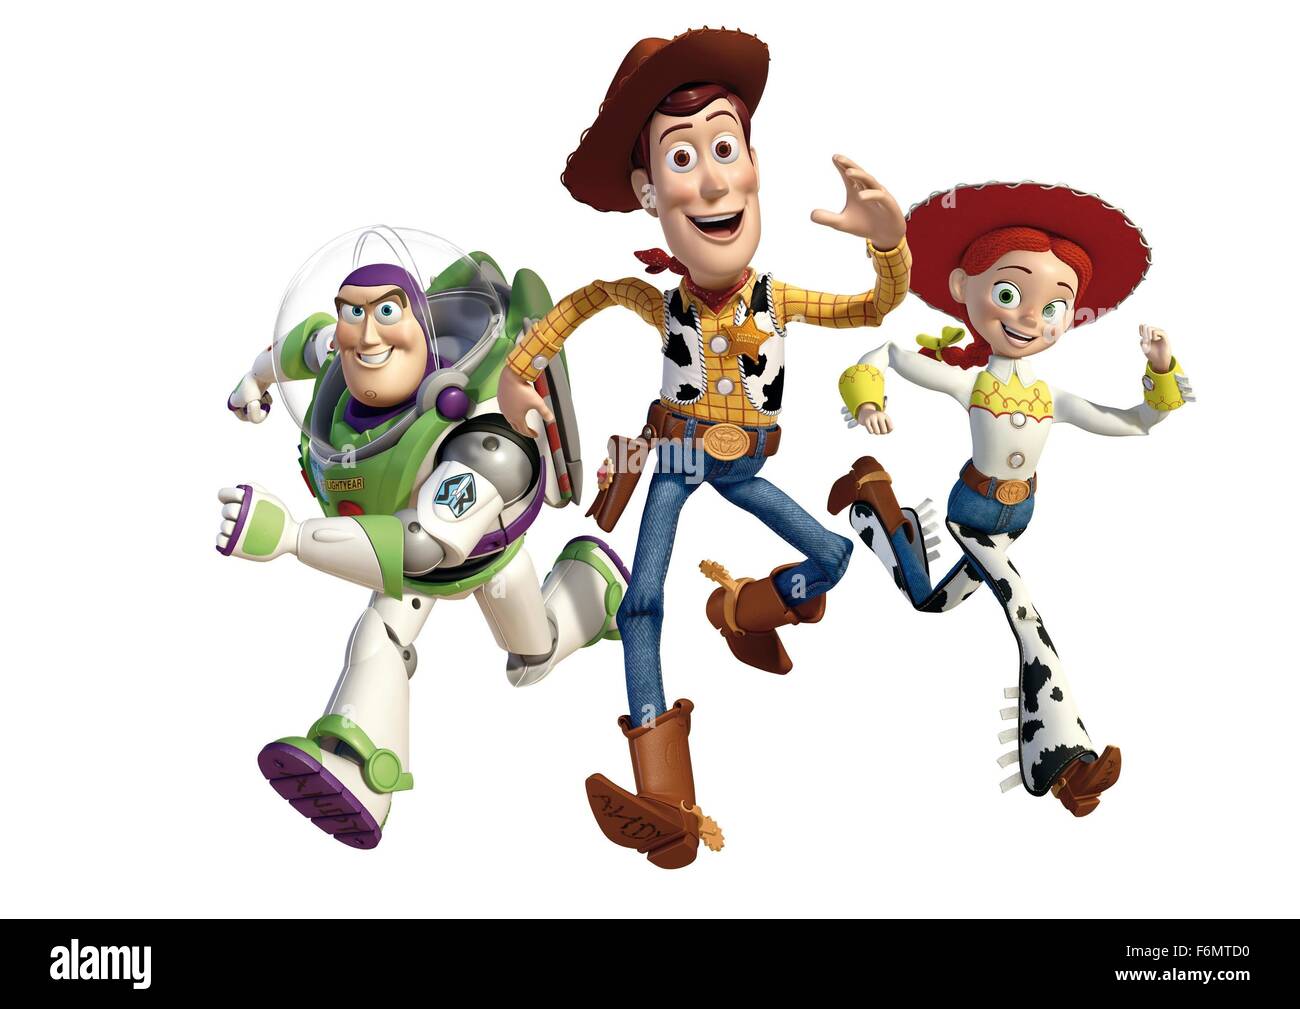 Toy story 3 Cut Out Stock Images & Pictures - Alamy